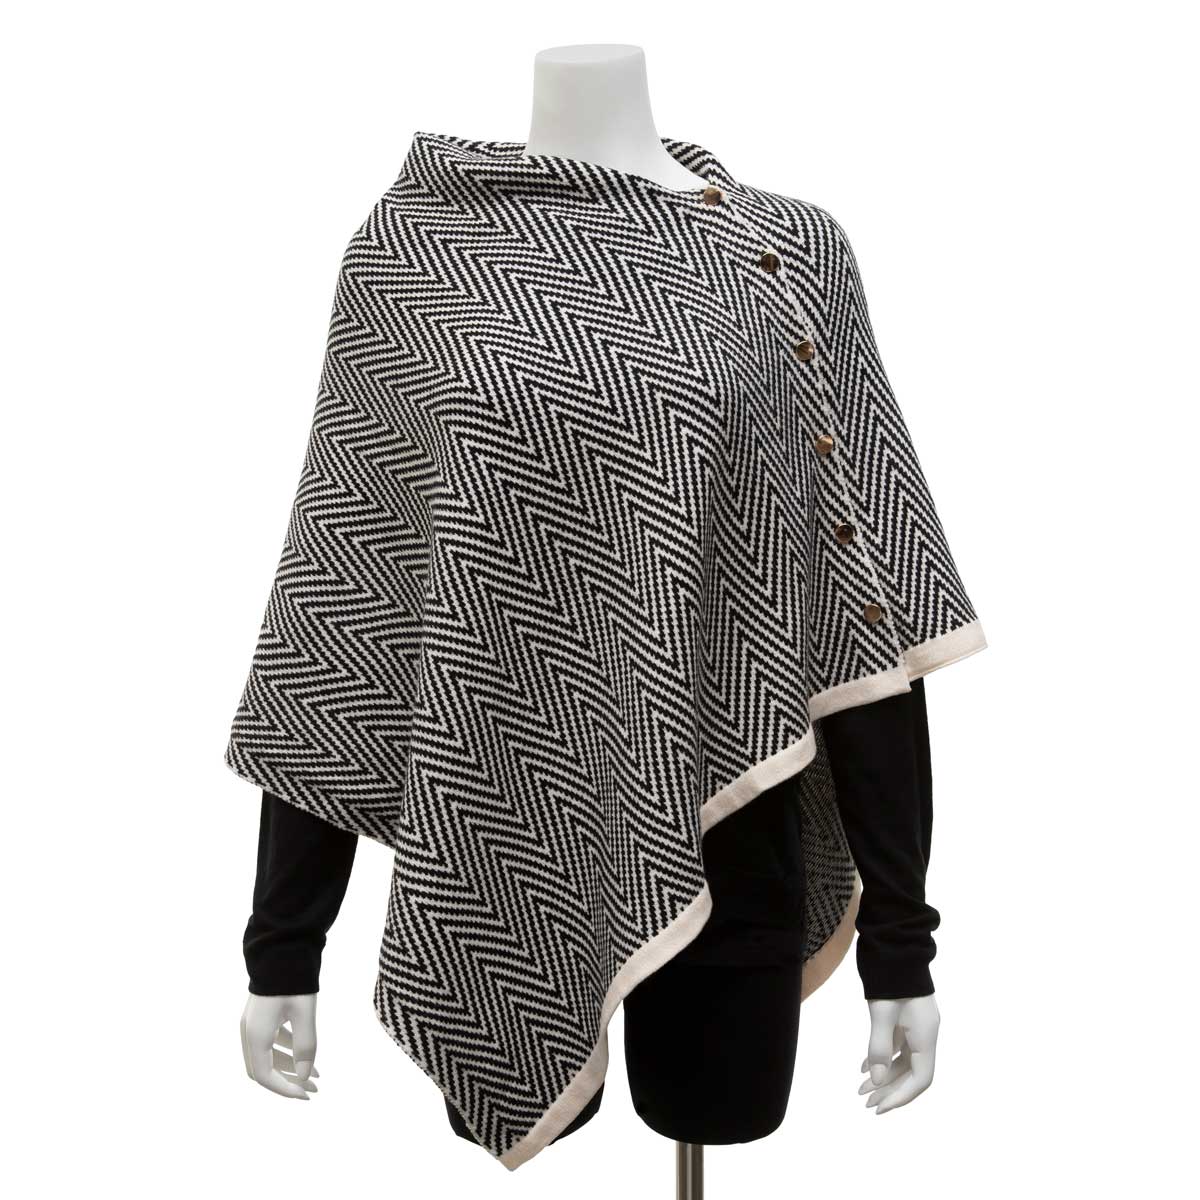 BLACK ZIG ZAG PONCHO WITH BUTTONS 30"X34" (ONE SIZE FITS MOST)